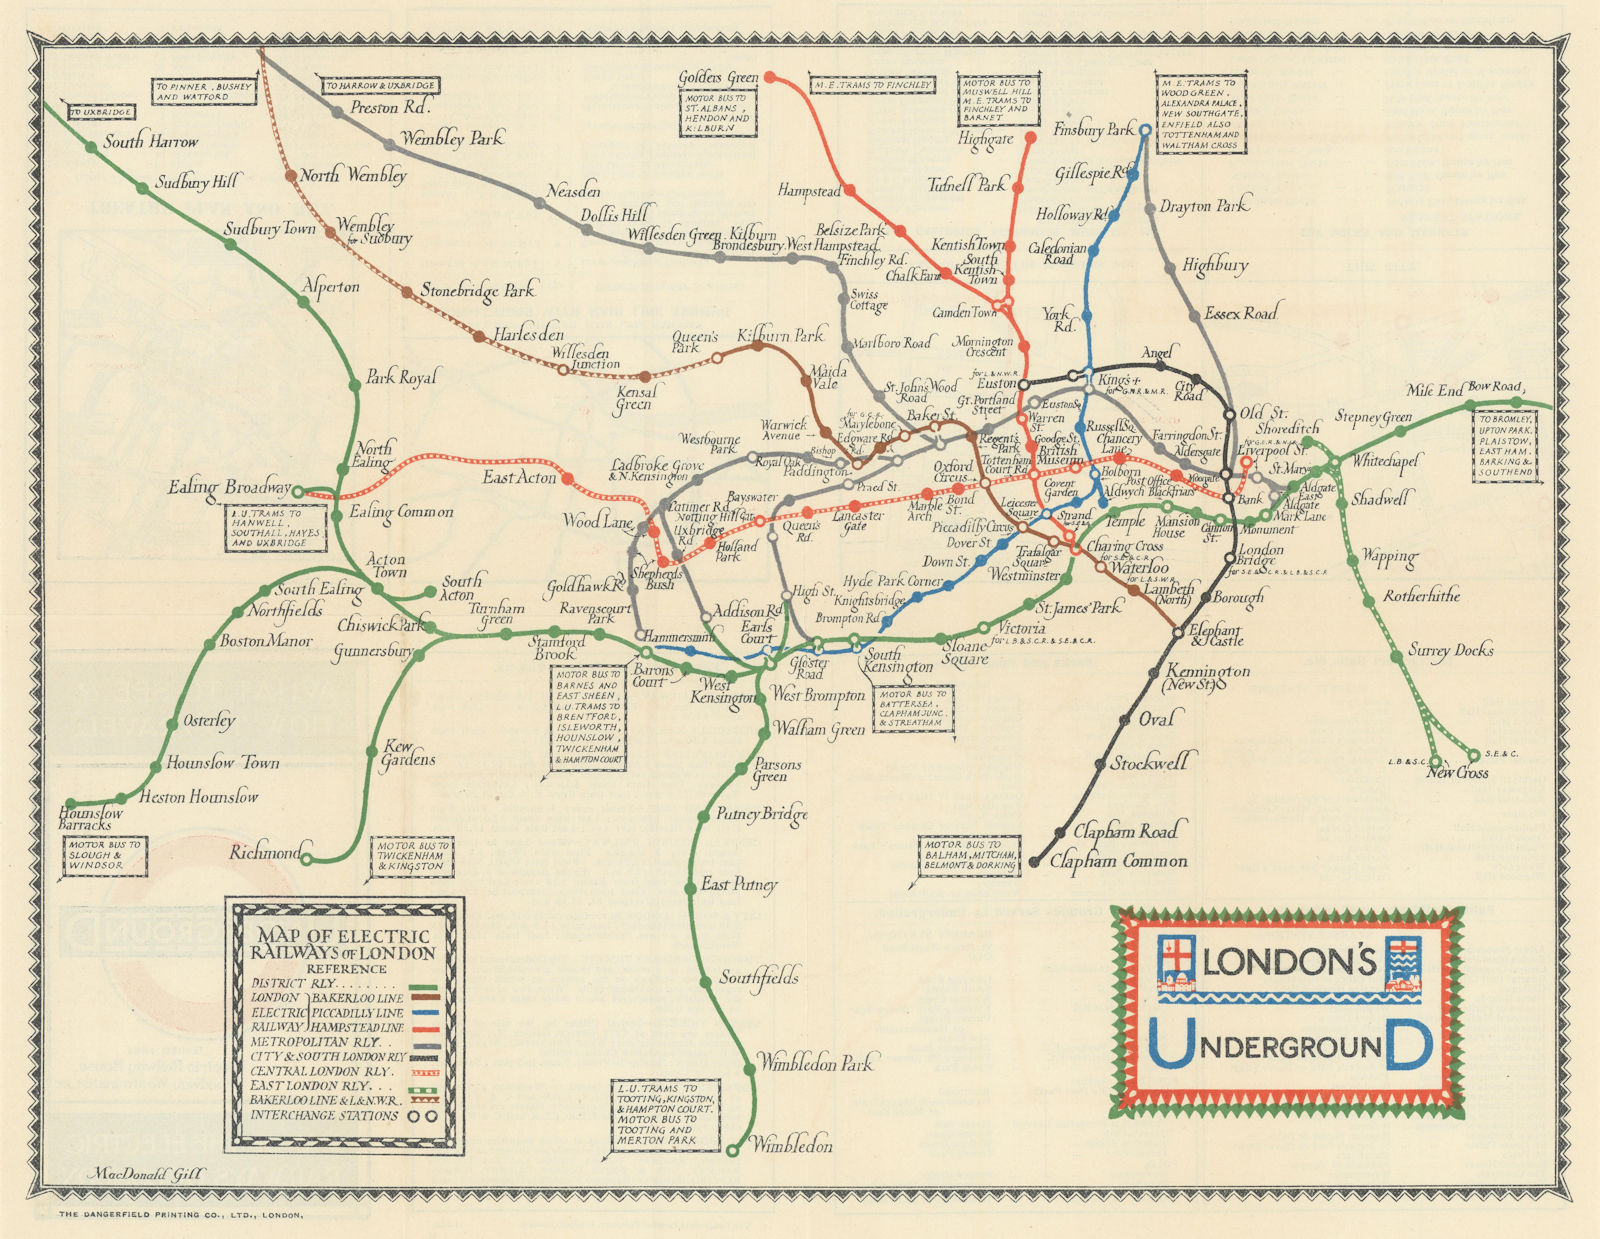 Associate Product London's Underground. What to See/How to Travel. Macdonald Gill. March 1922 map